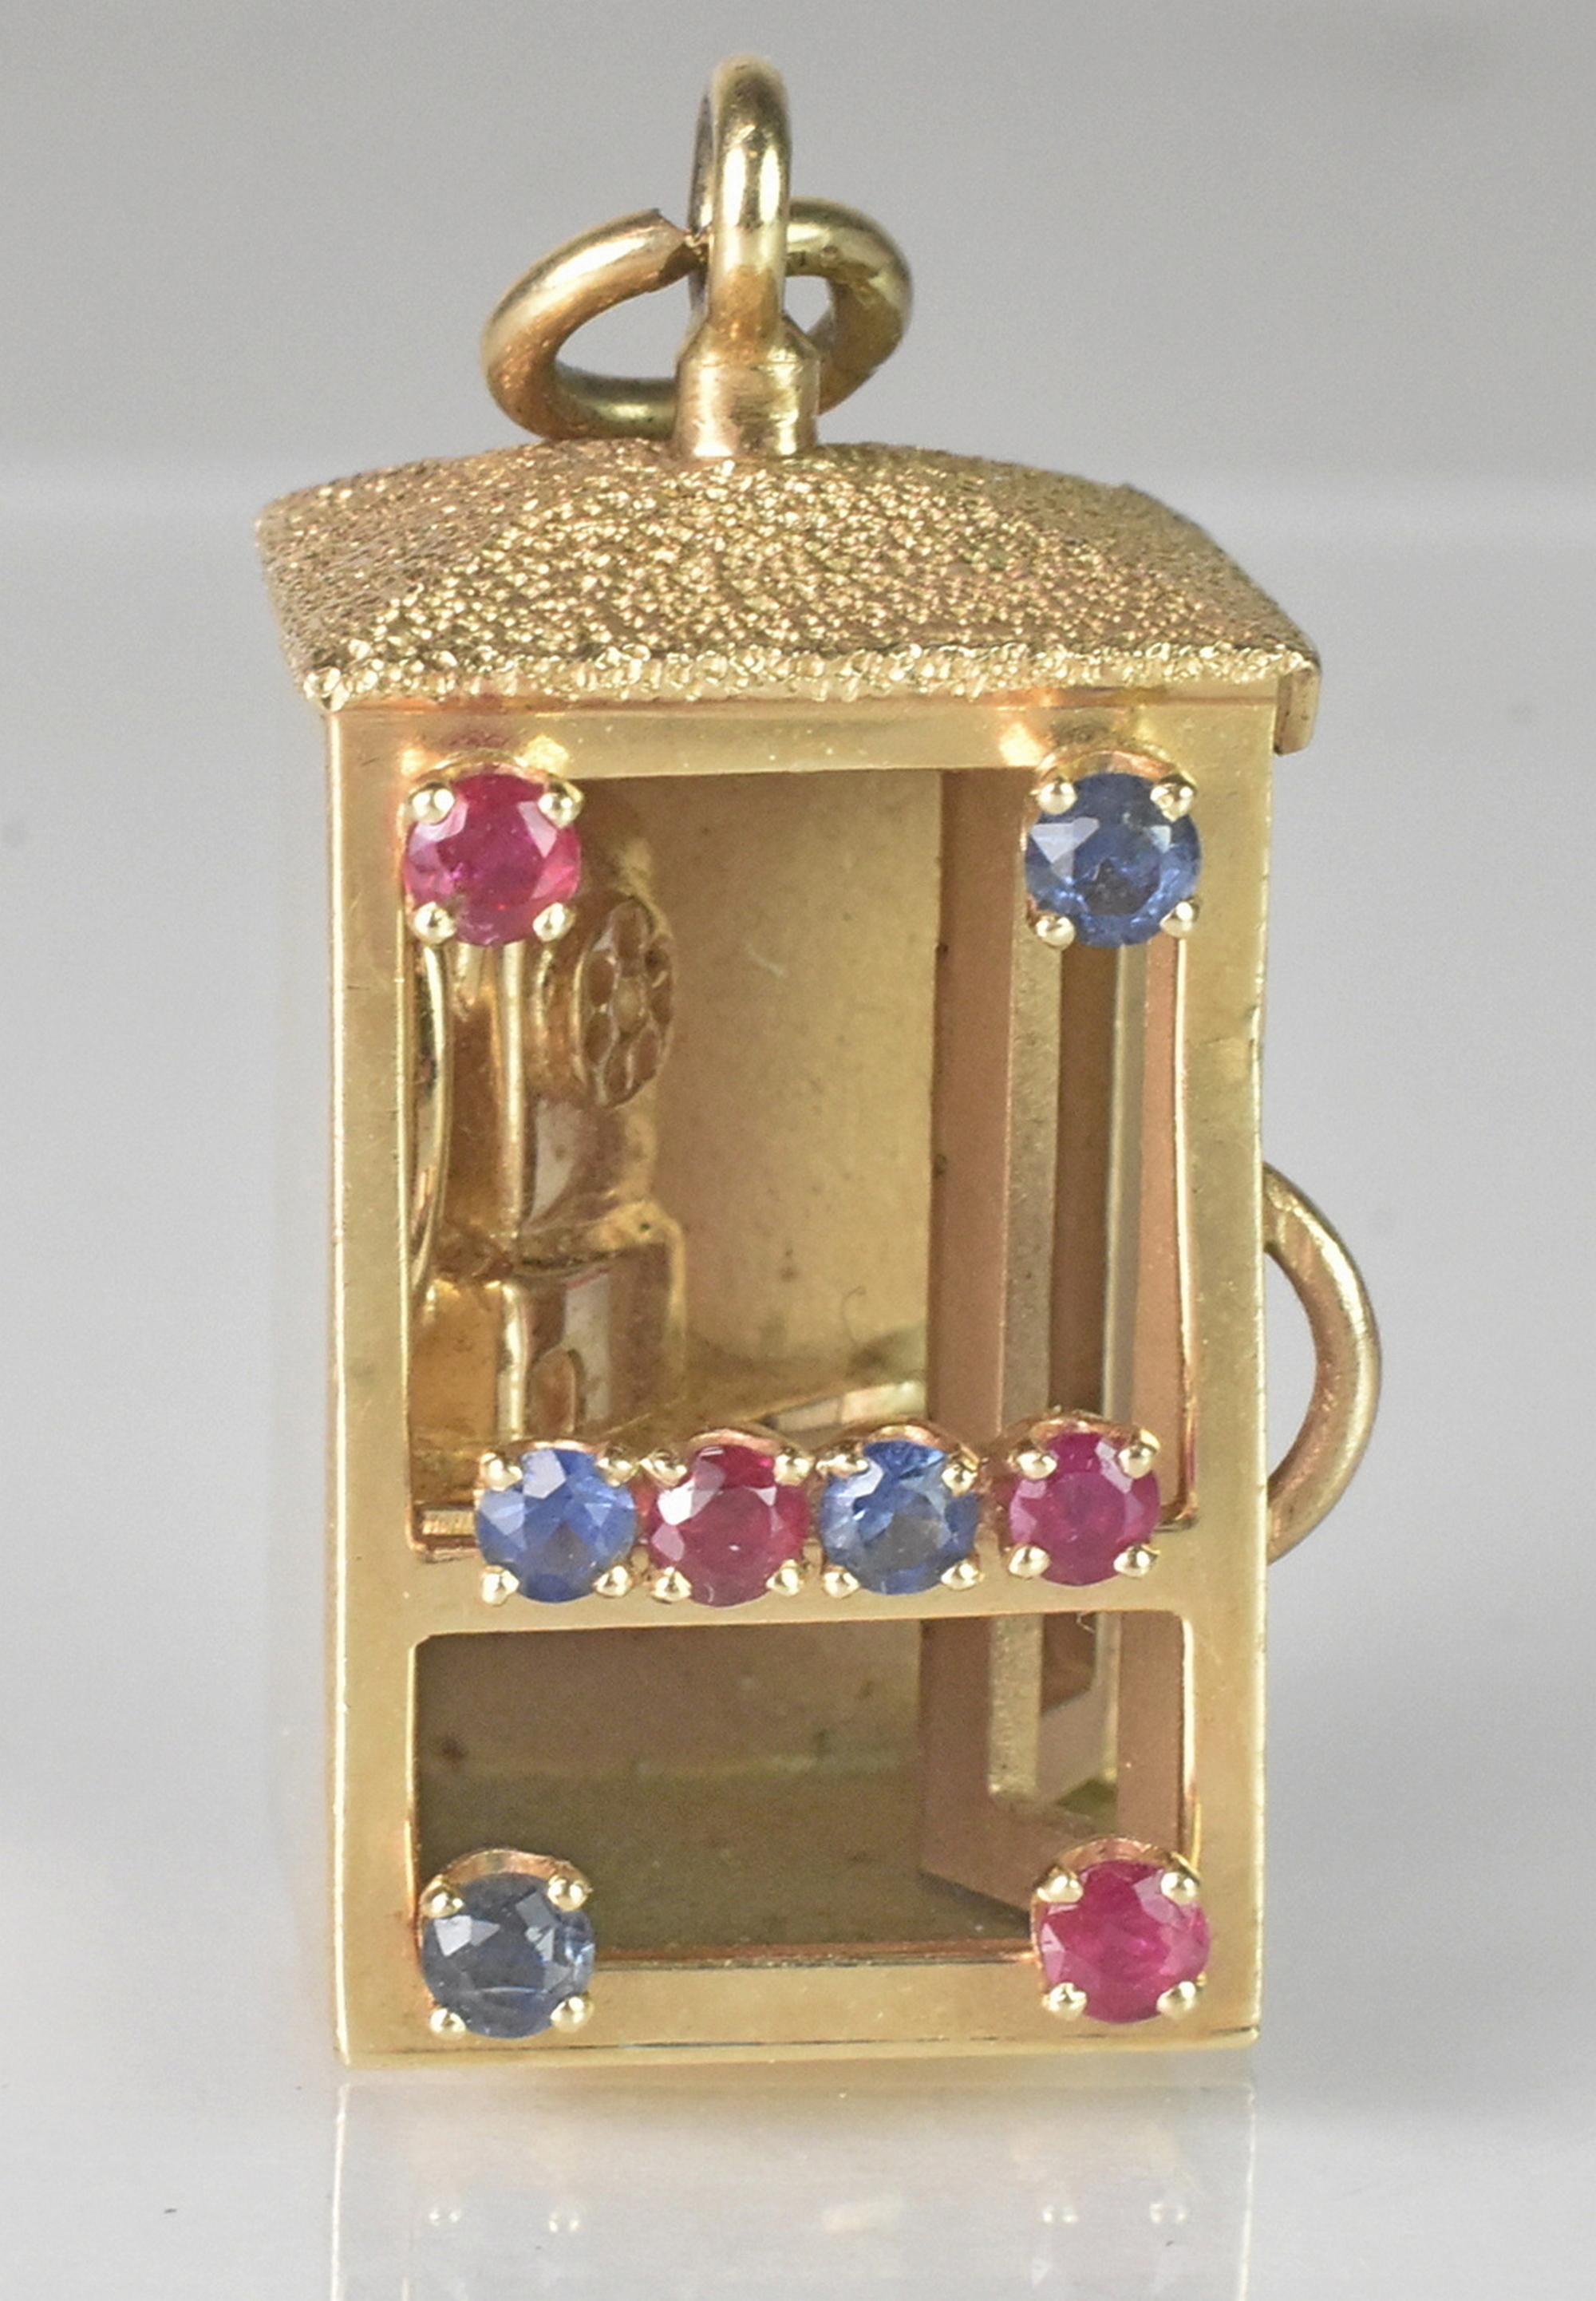 14K gold phonebooth Charm pendant with gems by Dankner. Beautiful blue and red gems on a phonebooth with movable doors. 14K Yellow Gold. Stamped 14K Dankner copyright '53. Great condition wear is consistent with usage and age. 15.9 grams.